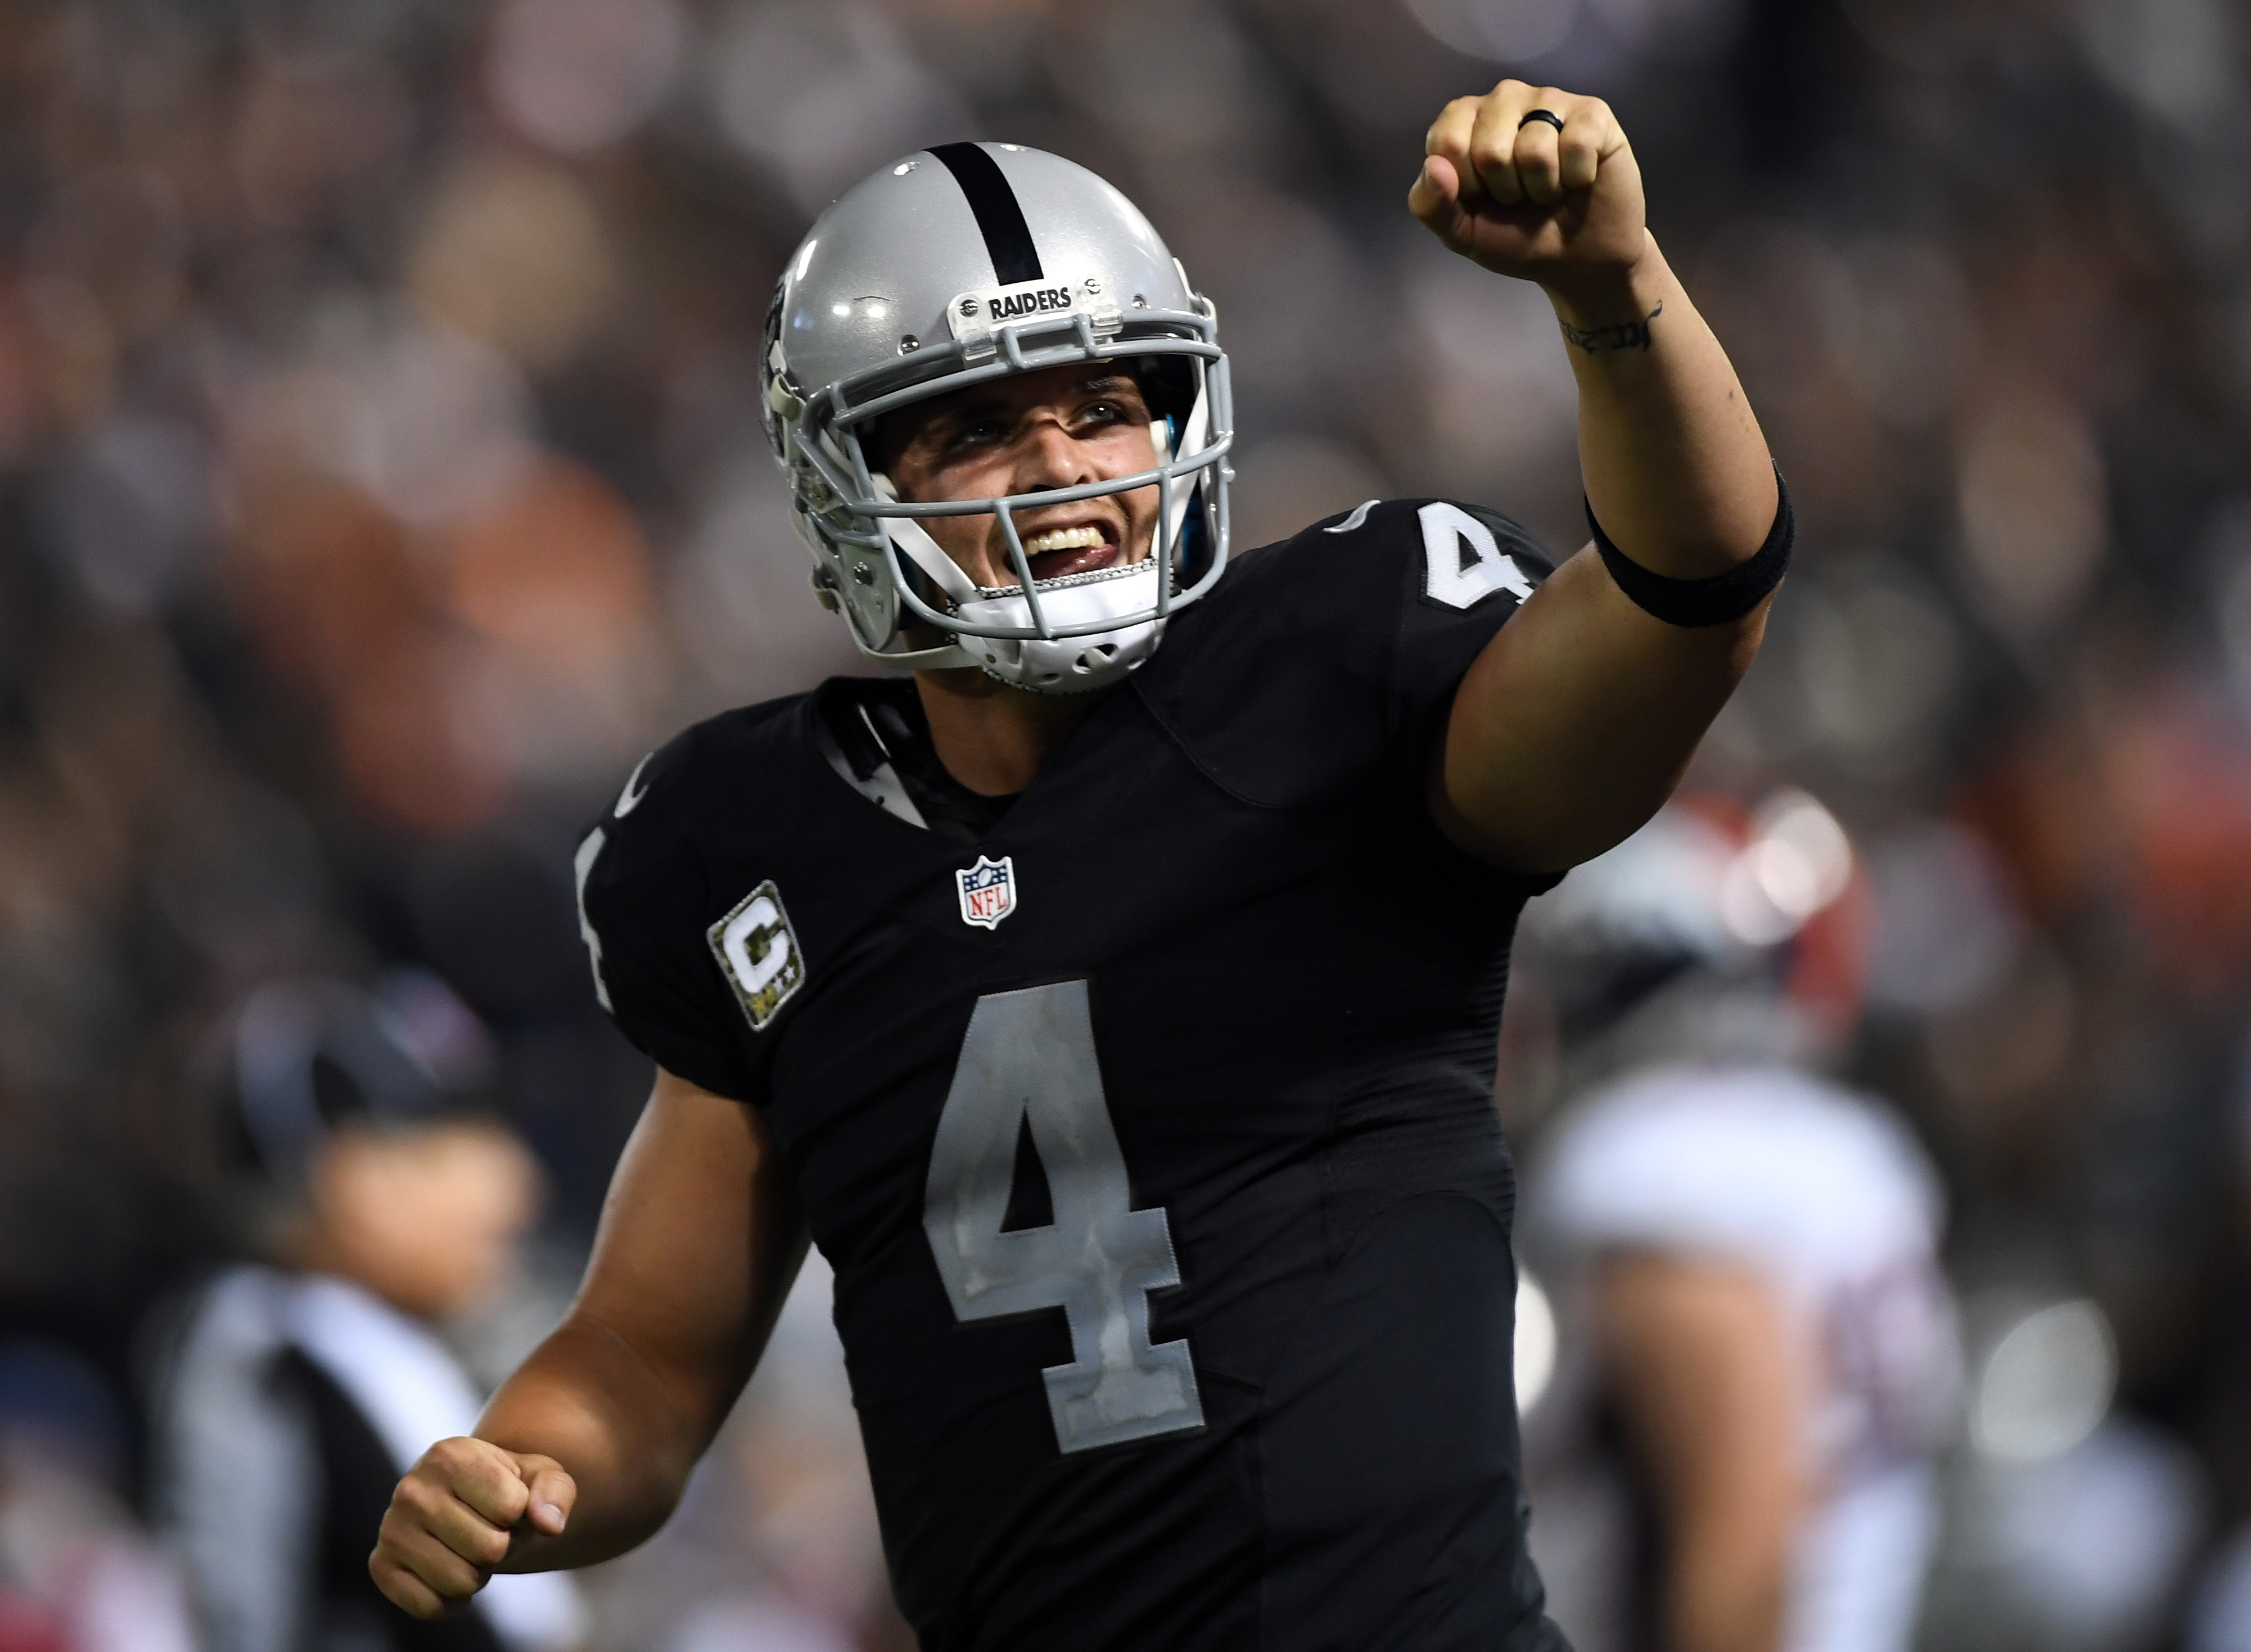 NFL Playoff Picture, AFC Playoff Picture, NFC Playoff Picture, NFL Playoff Seeding,NFL Playoff Updated, NFL Playoff chances, NFL Playoff teams, NFL Playoff wild card, NFL Playoff projected